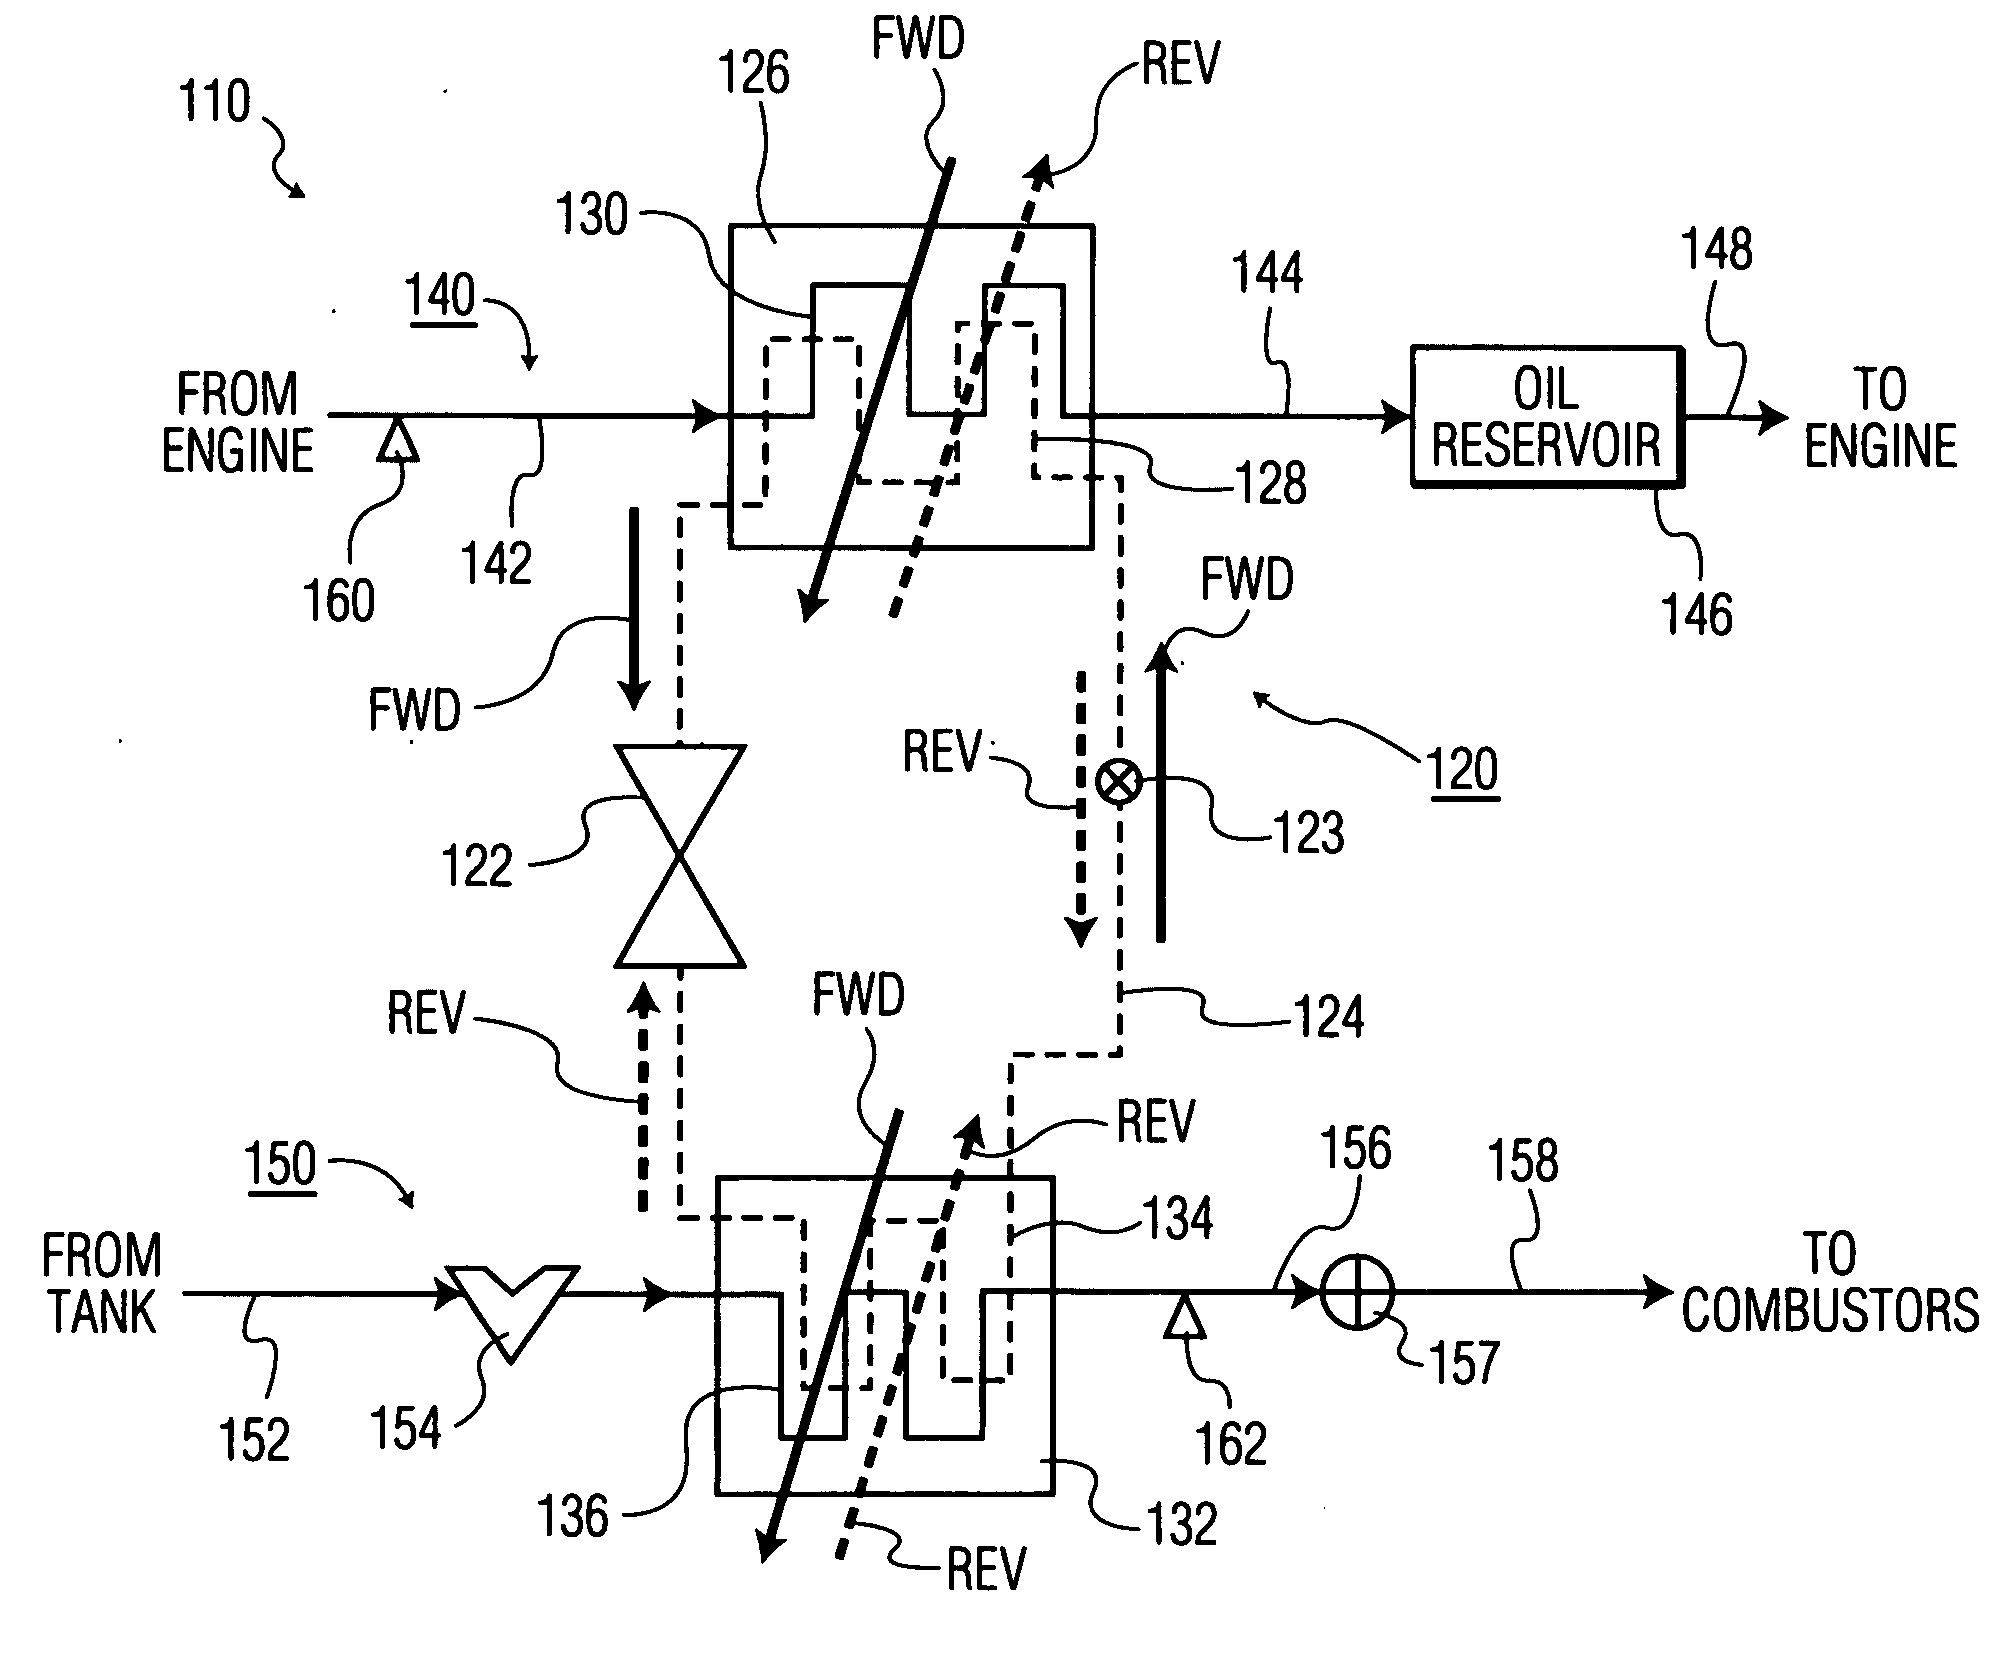 Systems and methods for thermal management in a gas turbine powerplant